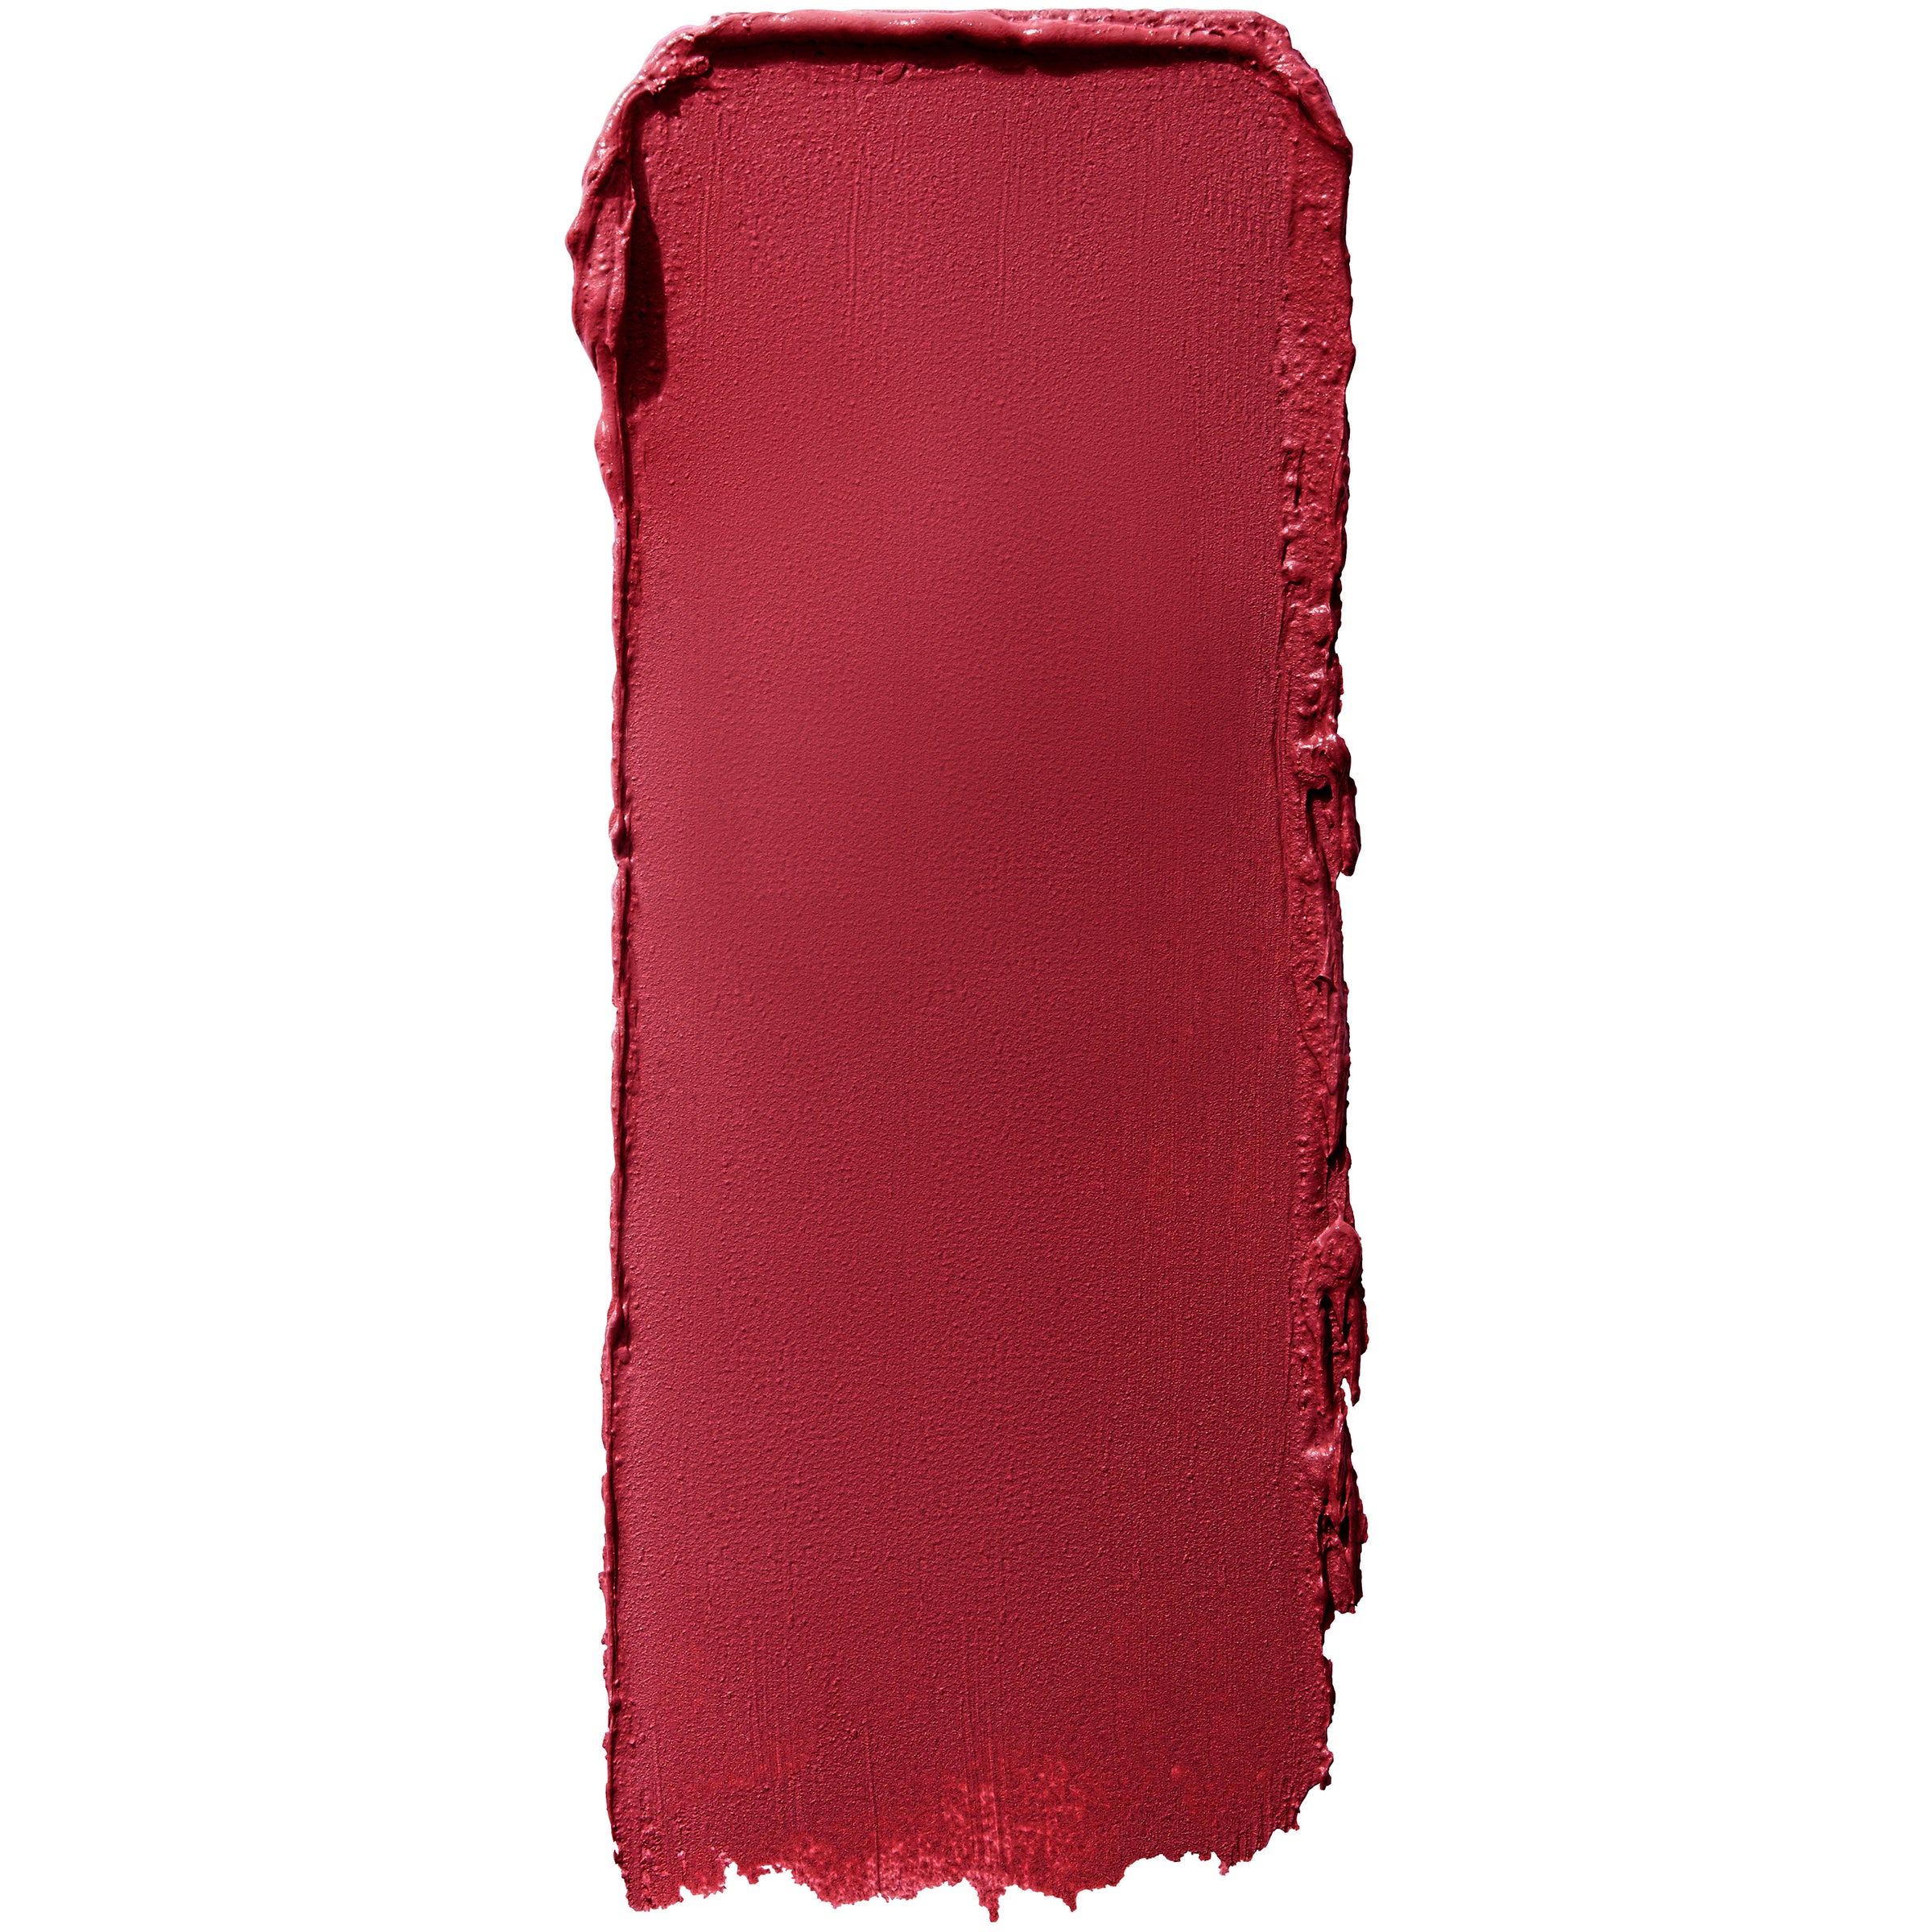 MAYBELLINE Superstay Matte Ink Crayon Lipstick - Own Your Empire